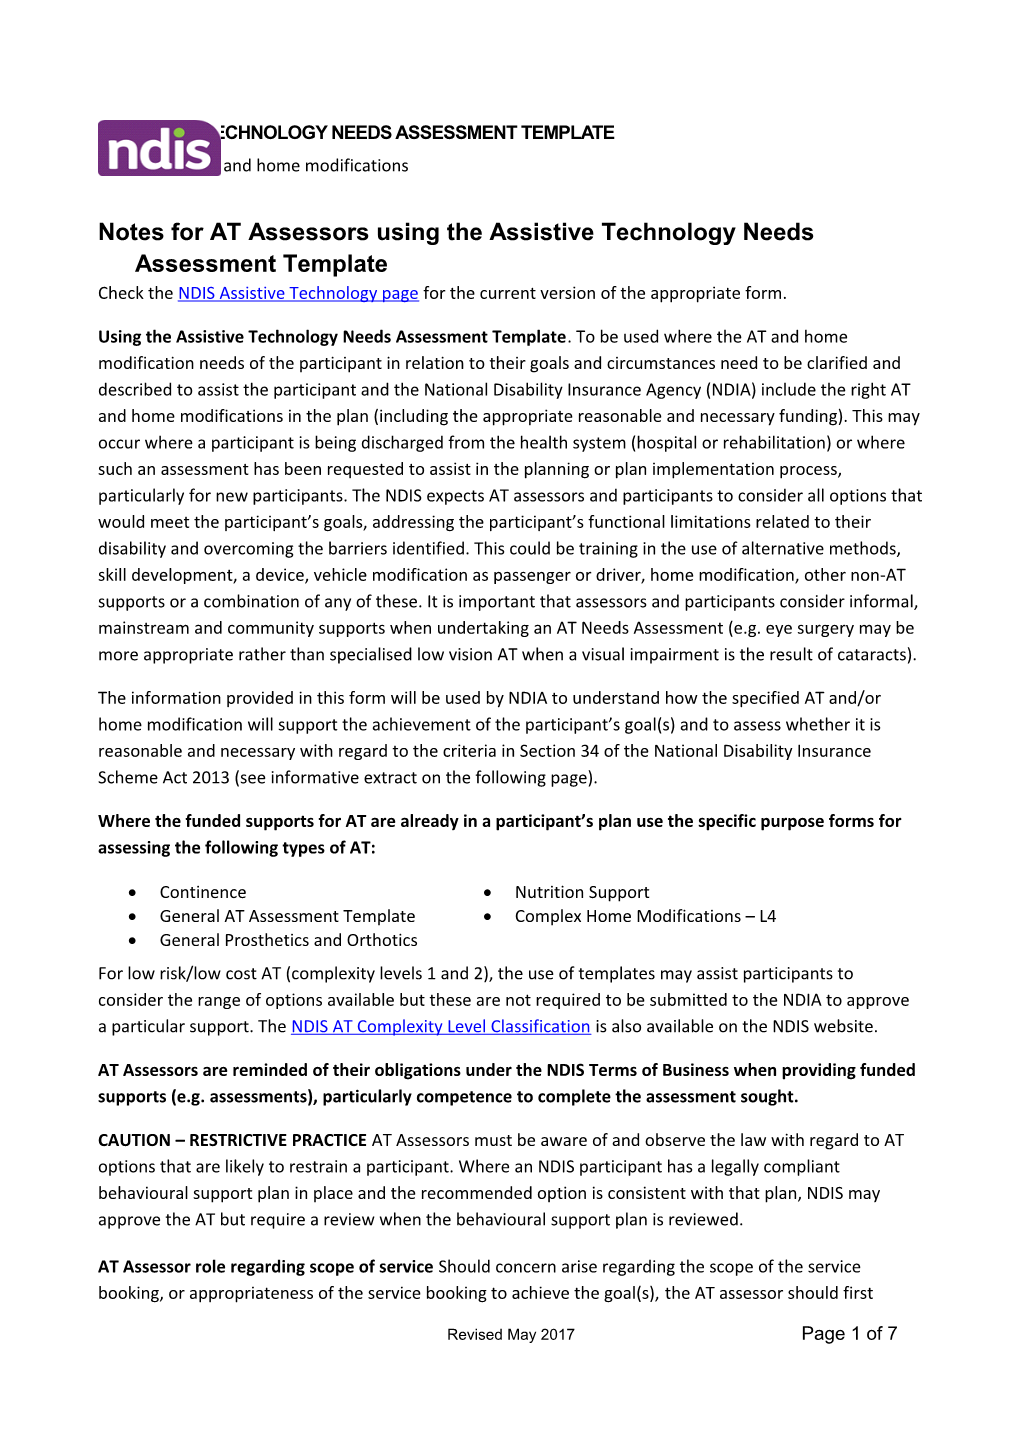 Notes for at Assessors Using the Assistive Technology Needs Assessment Template